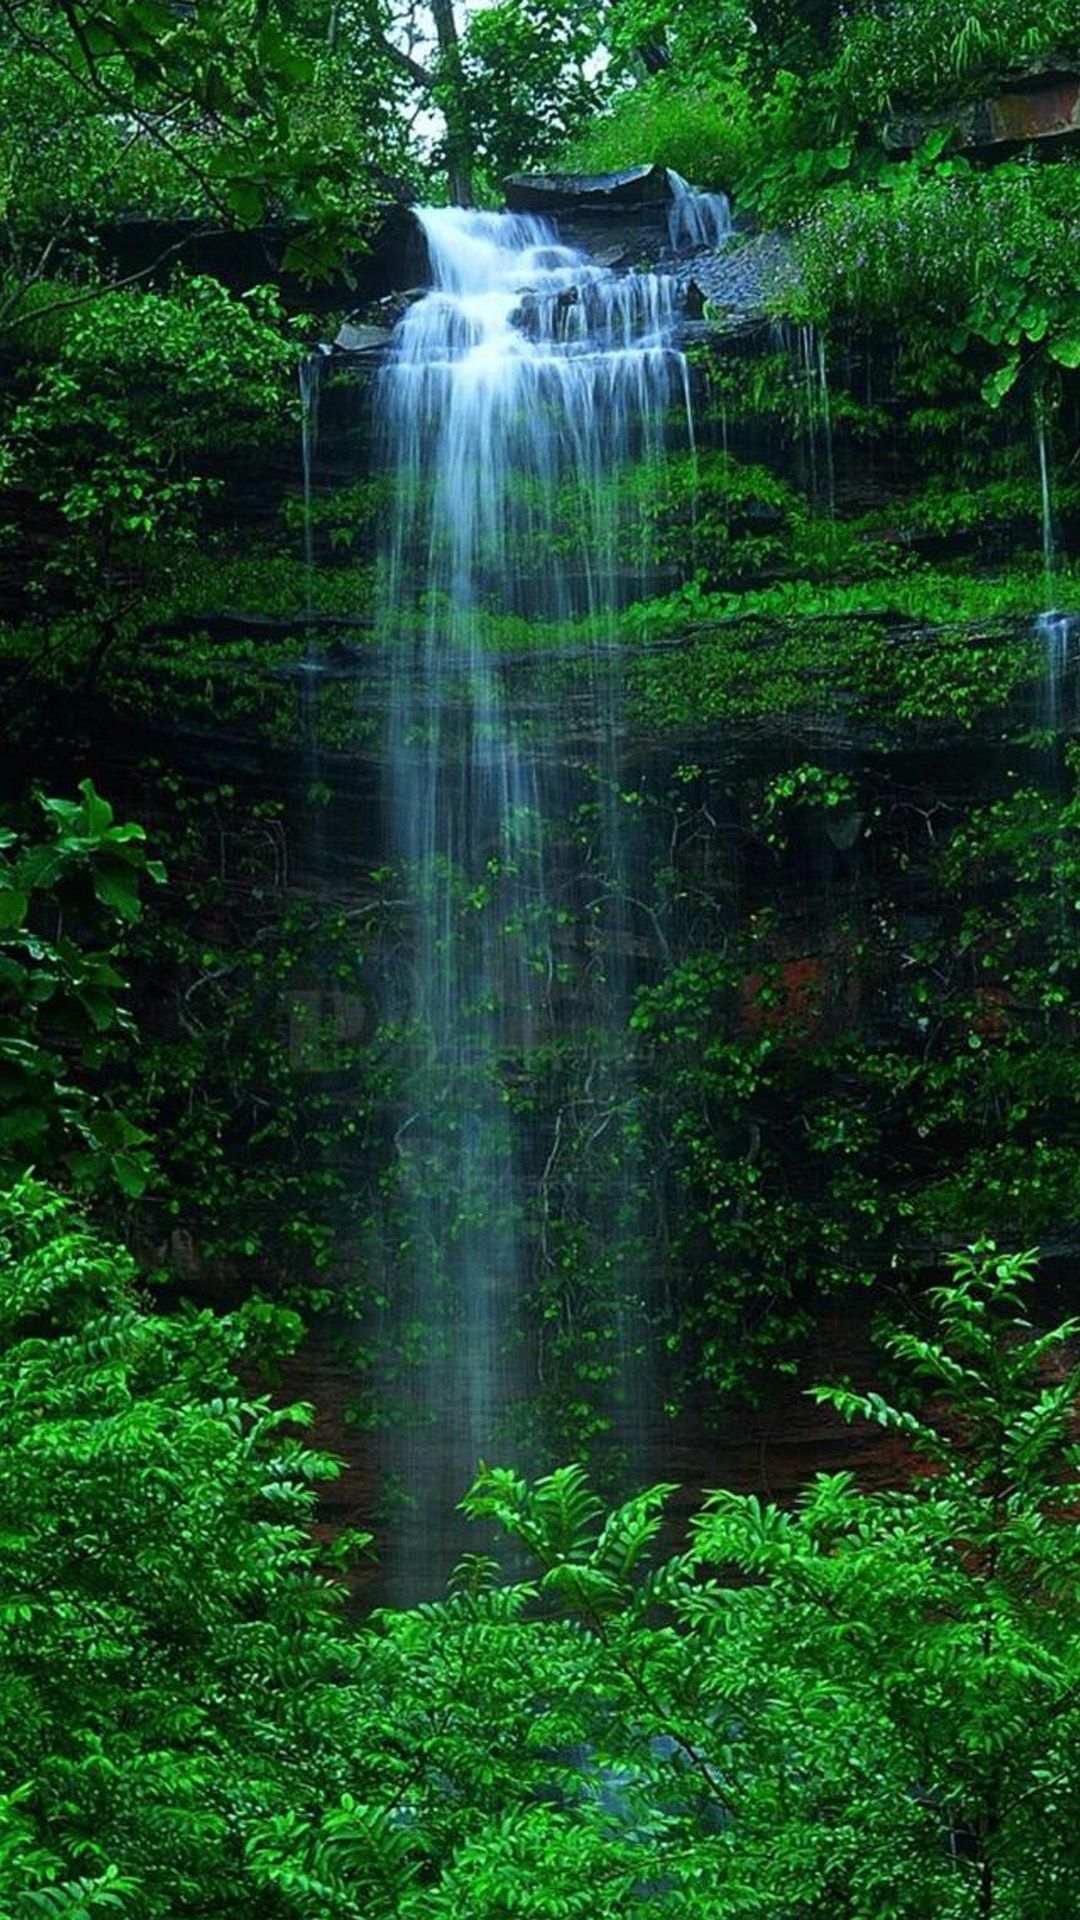 Nature Forest Waterfall IPhone 6 Wallpaper Download. IPhone Wallpaper, IPad Wallpaper One S. Waterfall Background, Waterfall Wallpaper, Forest Wallpaper Iphone